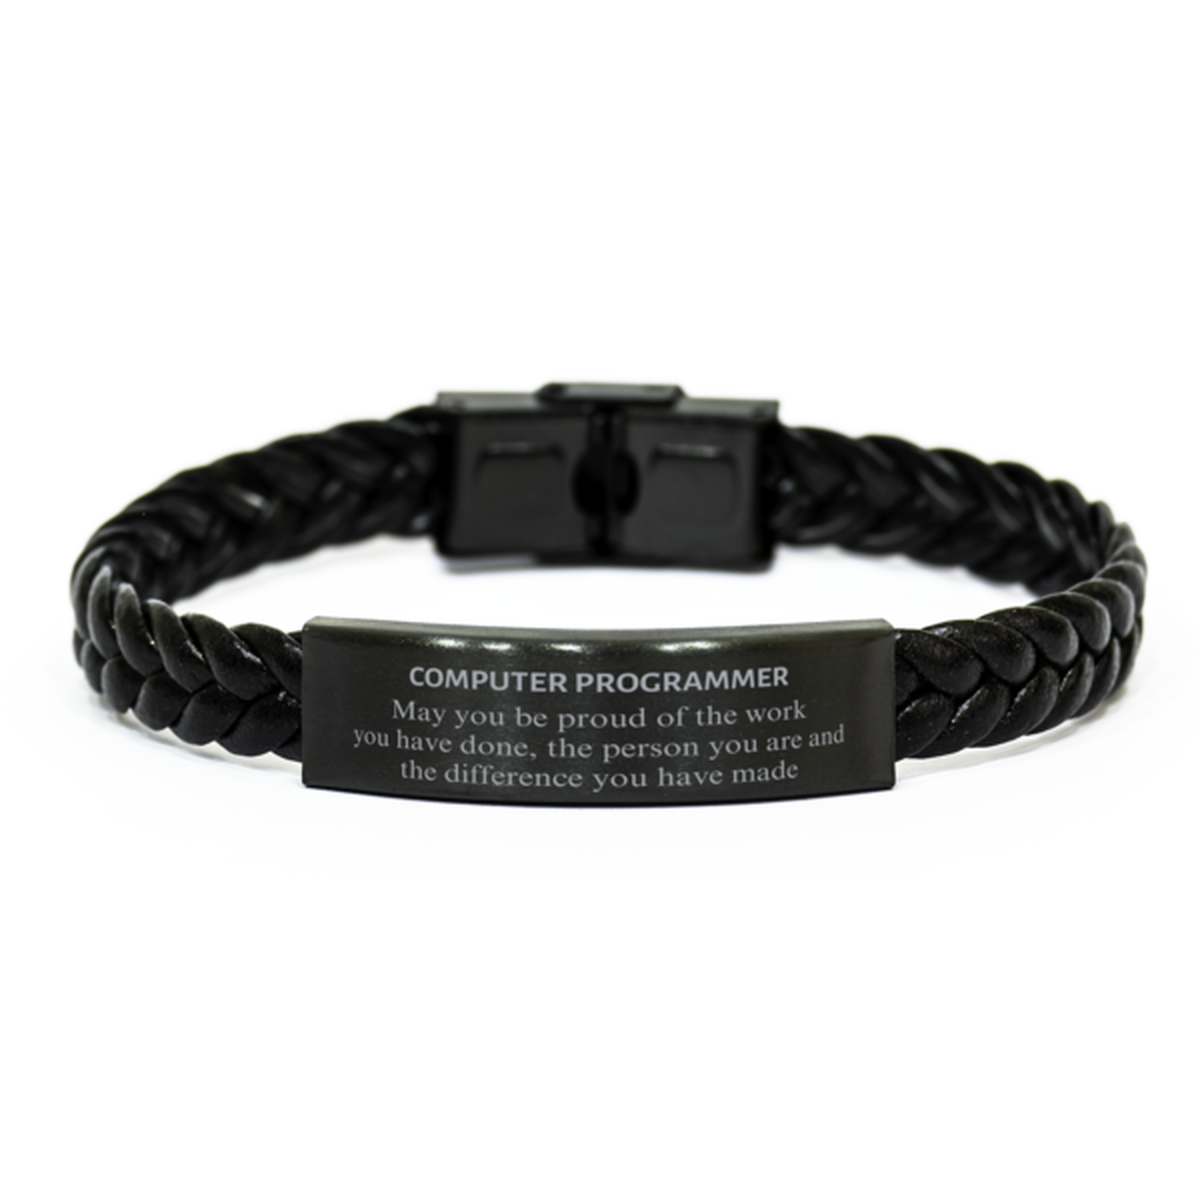 Computer Programmer May you be proud of the work you have done, Retirement Computer Programmer Braided Leather Bracelet for Colleague Appreciation Gifts Amazing for Computer Programmer